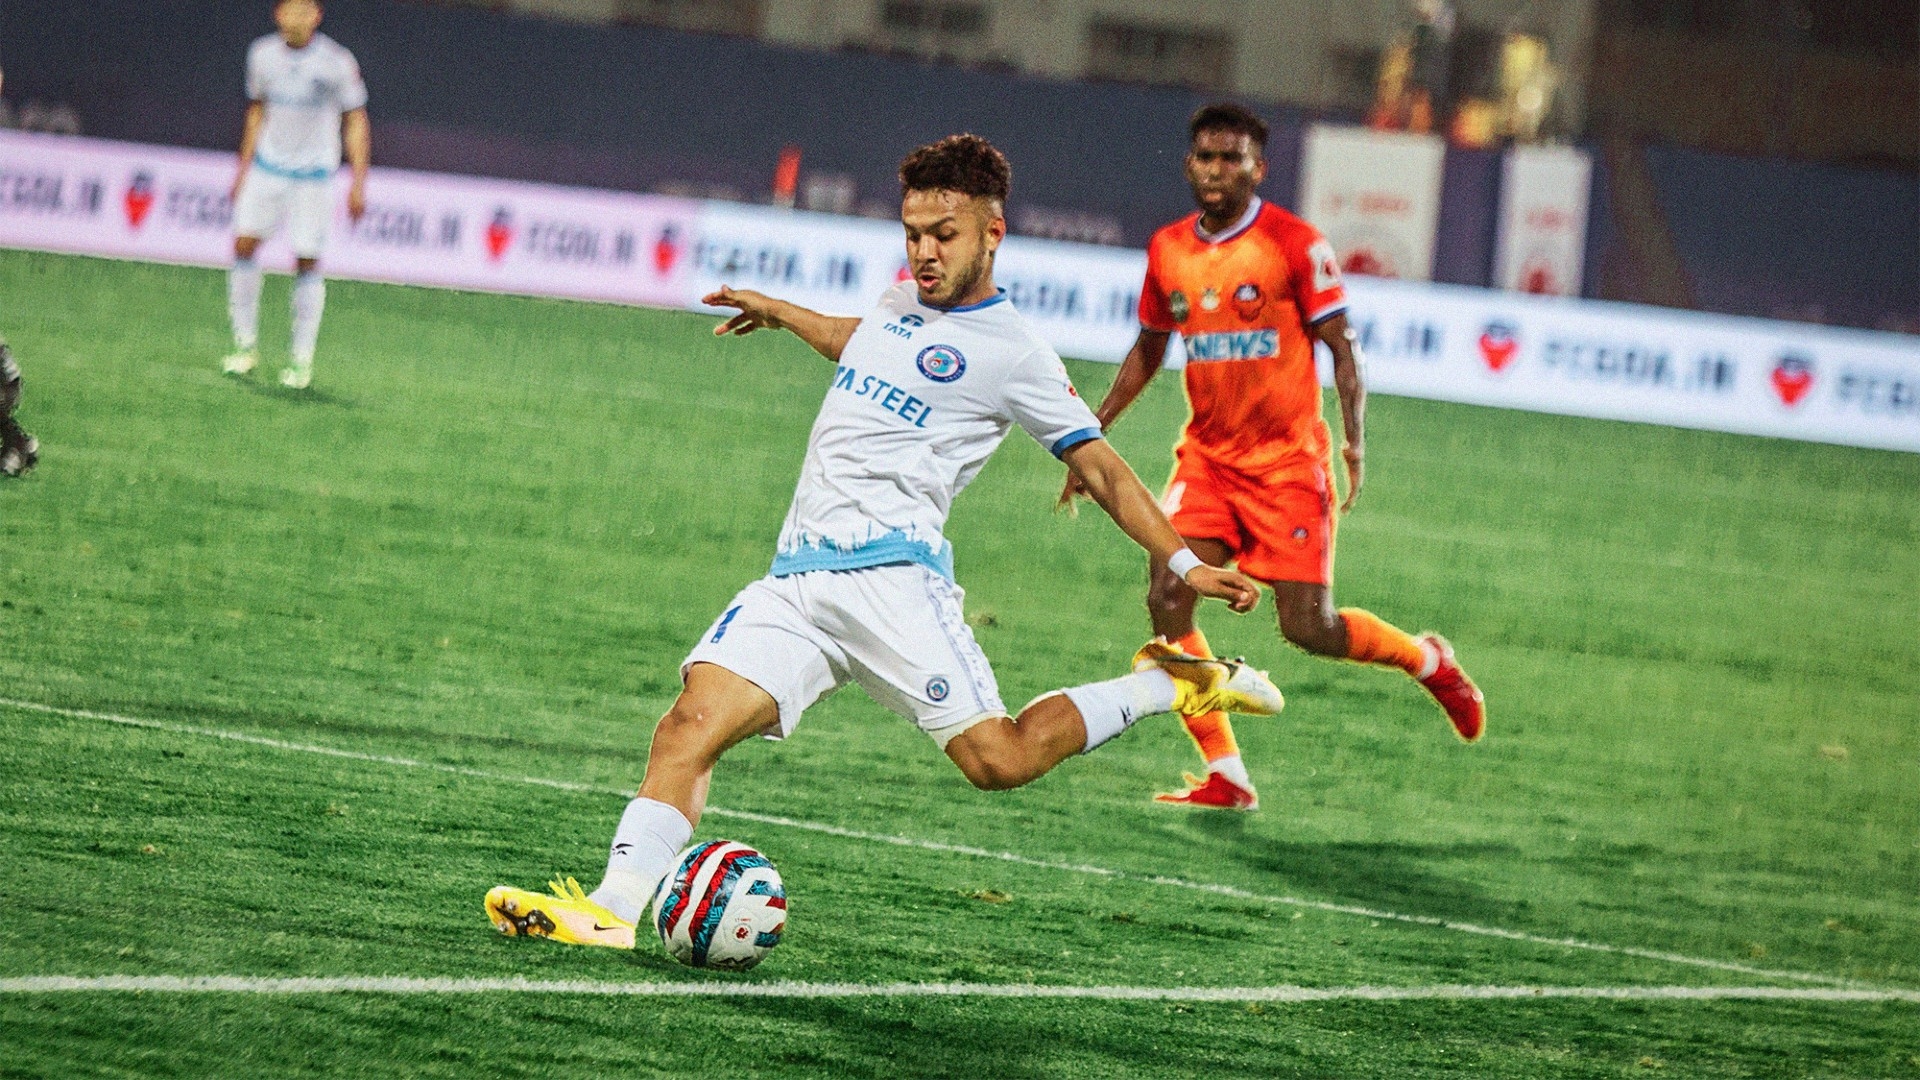 ISL 2021-22: Top five players to watch out for in the Odisha FC vs Jamshedpur FC clash